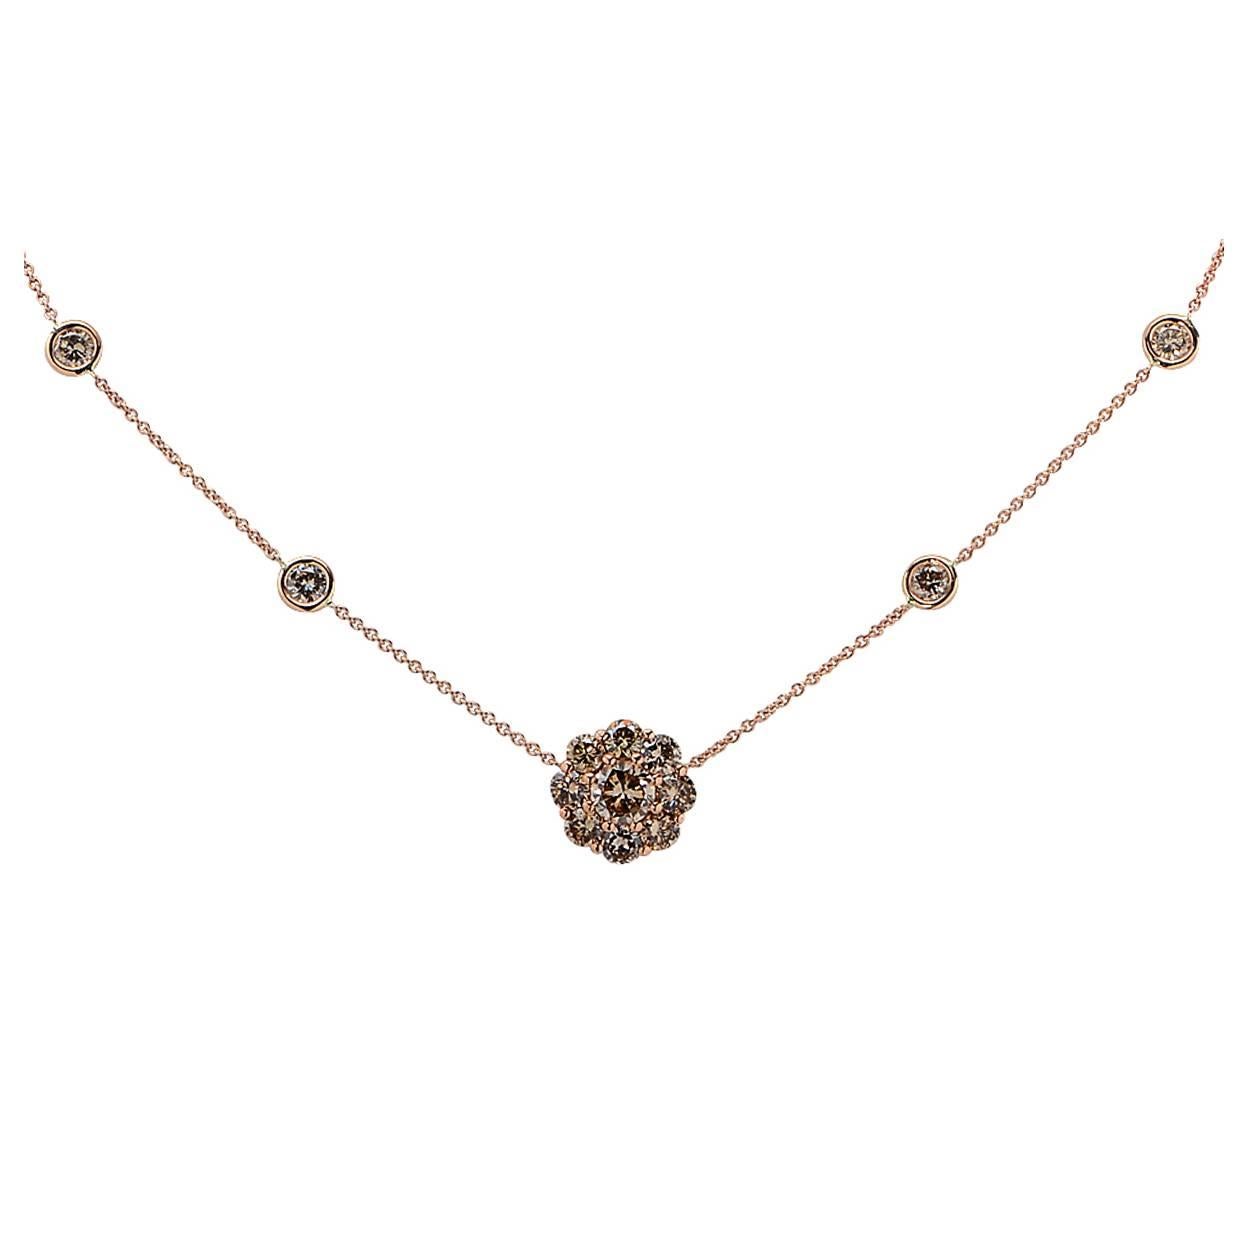 18 Karat Rose Gold Necklace Featuring a Fancy Brown Round Brilliant Cut Diamond Weighing 1.19ct Surrounded by 2.47cts of Fancy Brown Round Brilliant Cut Diamonds.